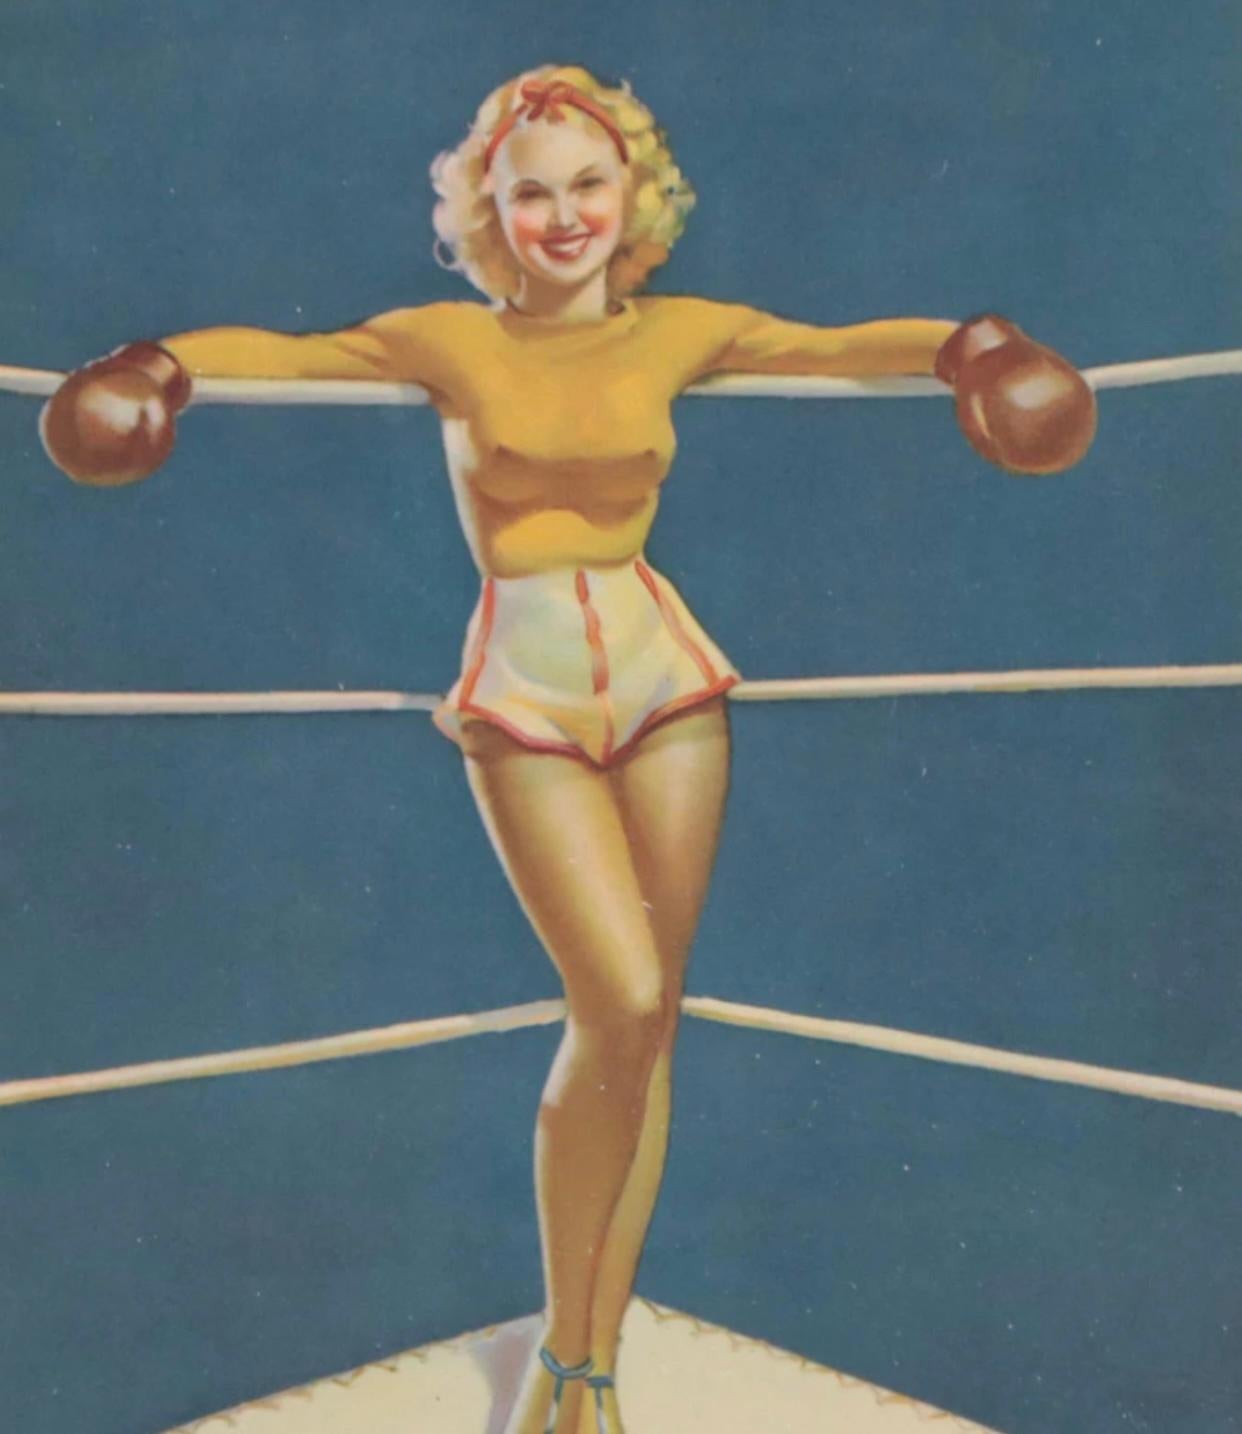 Black lacquered wood framed offset lithograph after Gil Elvgren, titled “A Knock Outgg”. Image site measurements, 7.5” x 9.5”. Framed measurements “12” x 15” x .5”. Not examined outside of the frame.   About the artist; Gil Elvgren studied at the